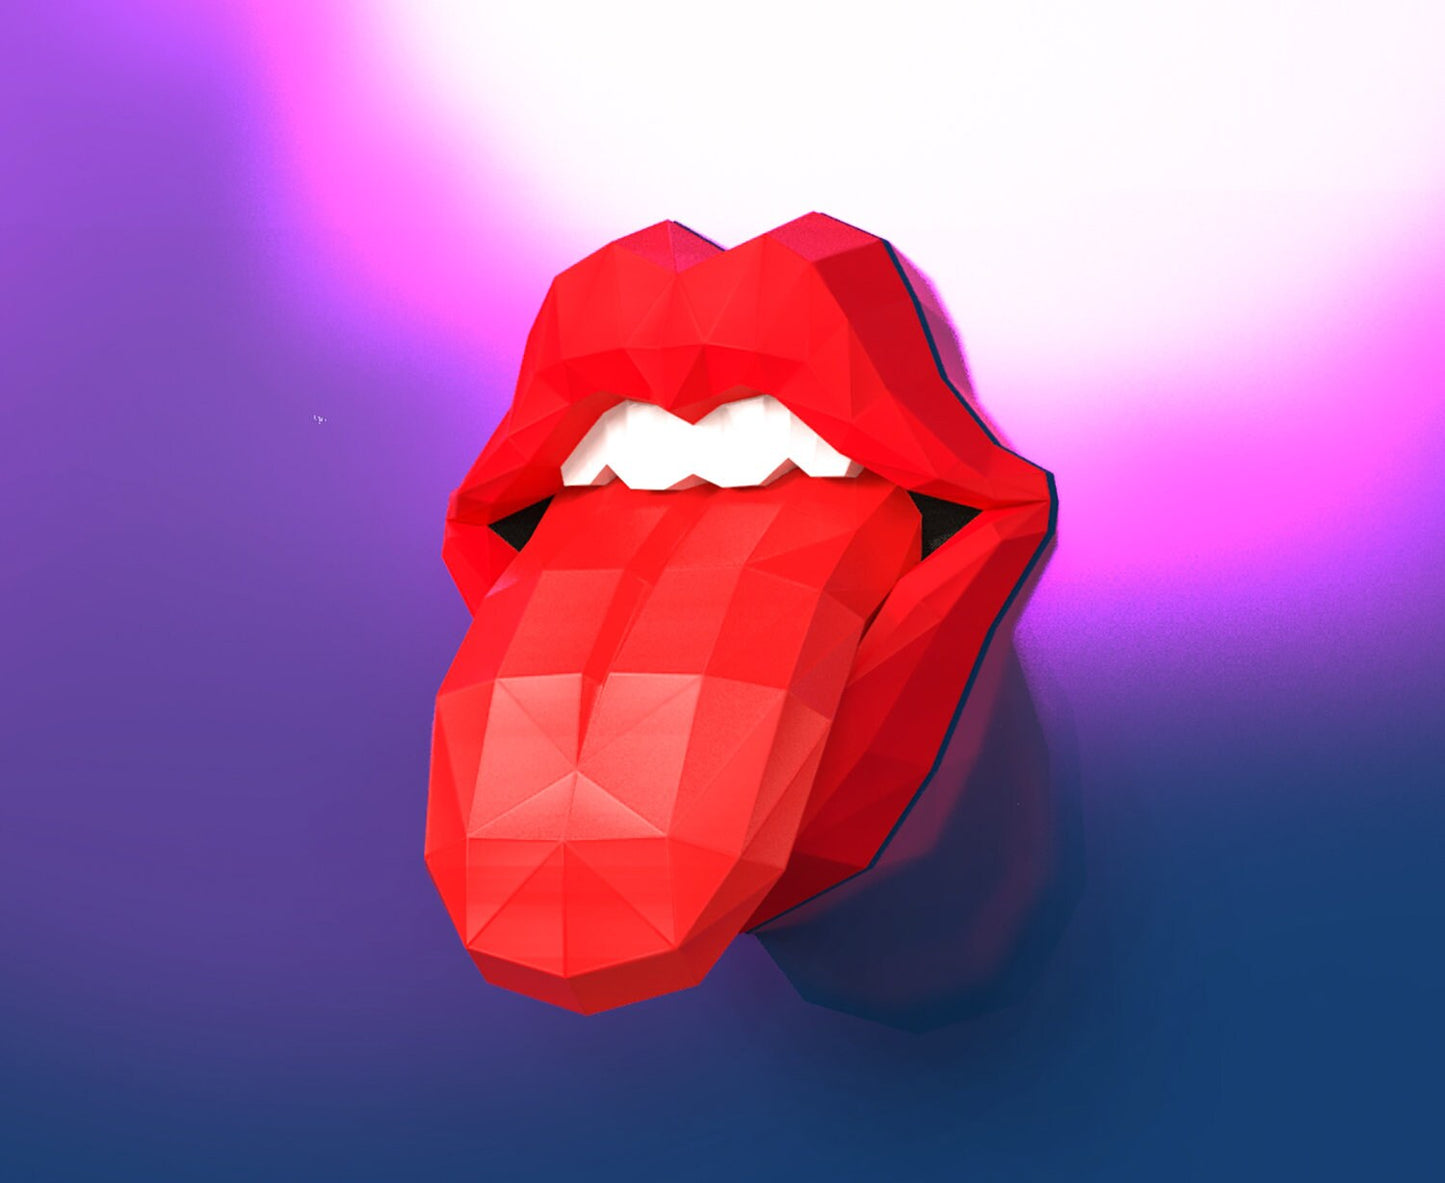 Lips With Tongue